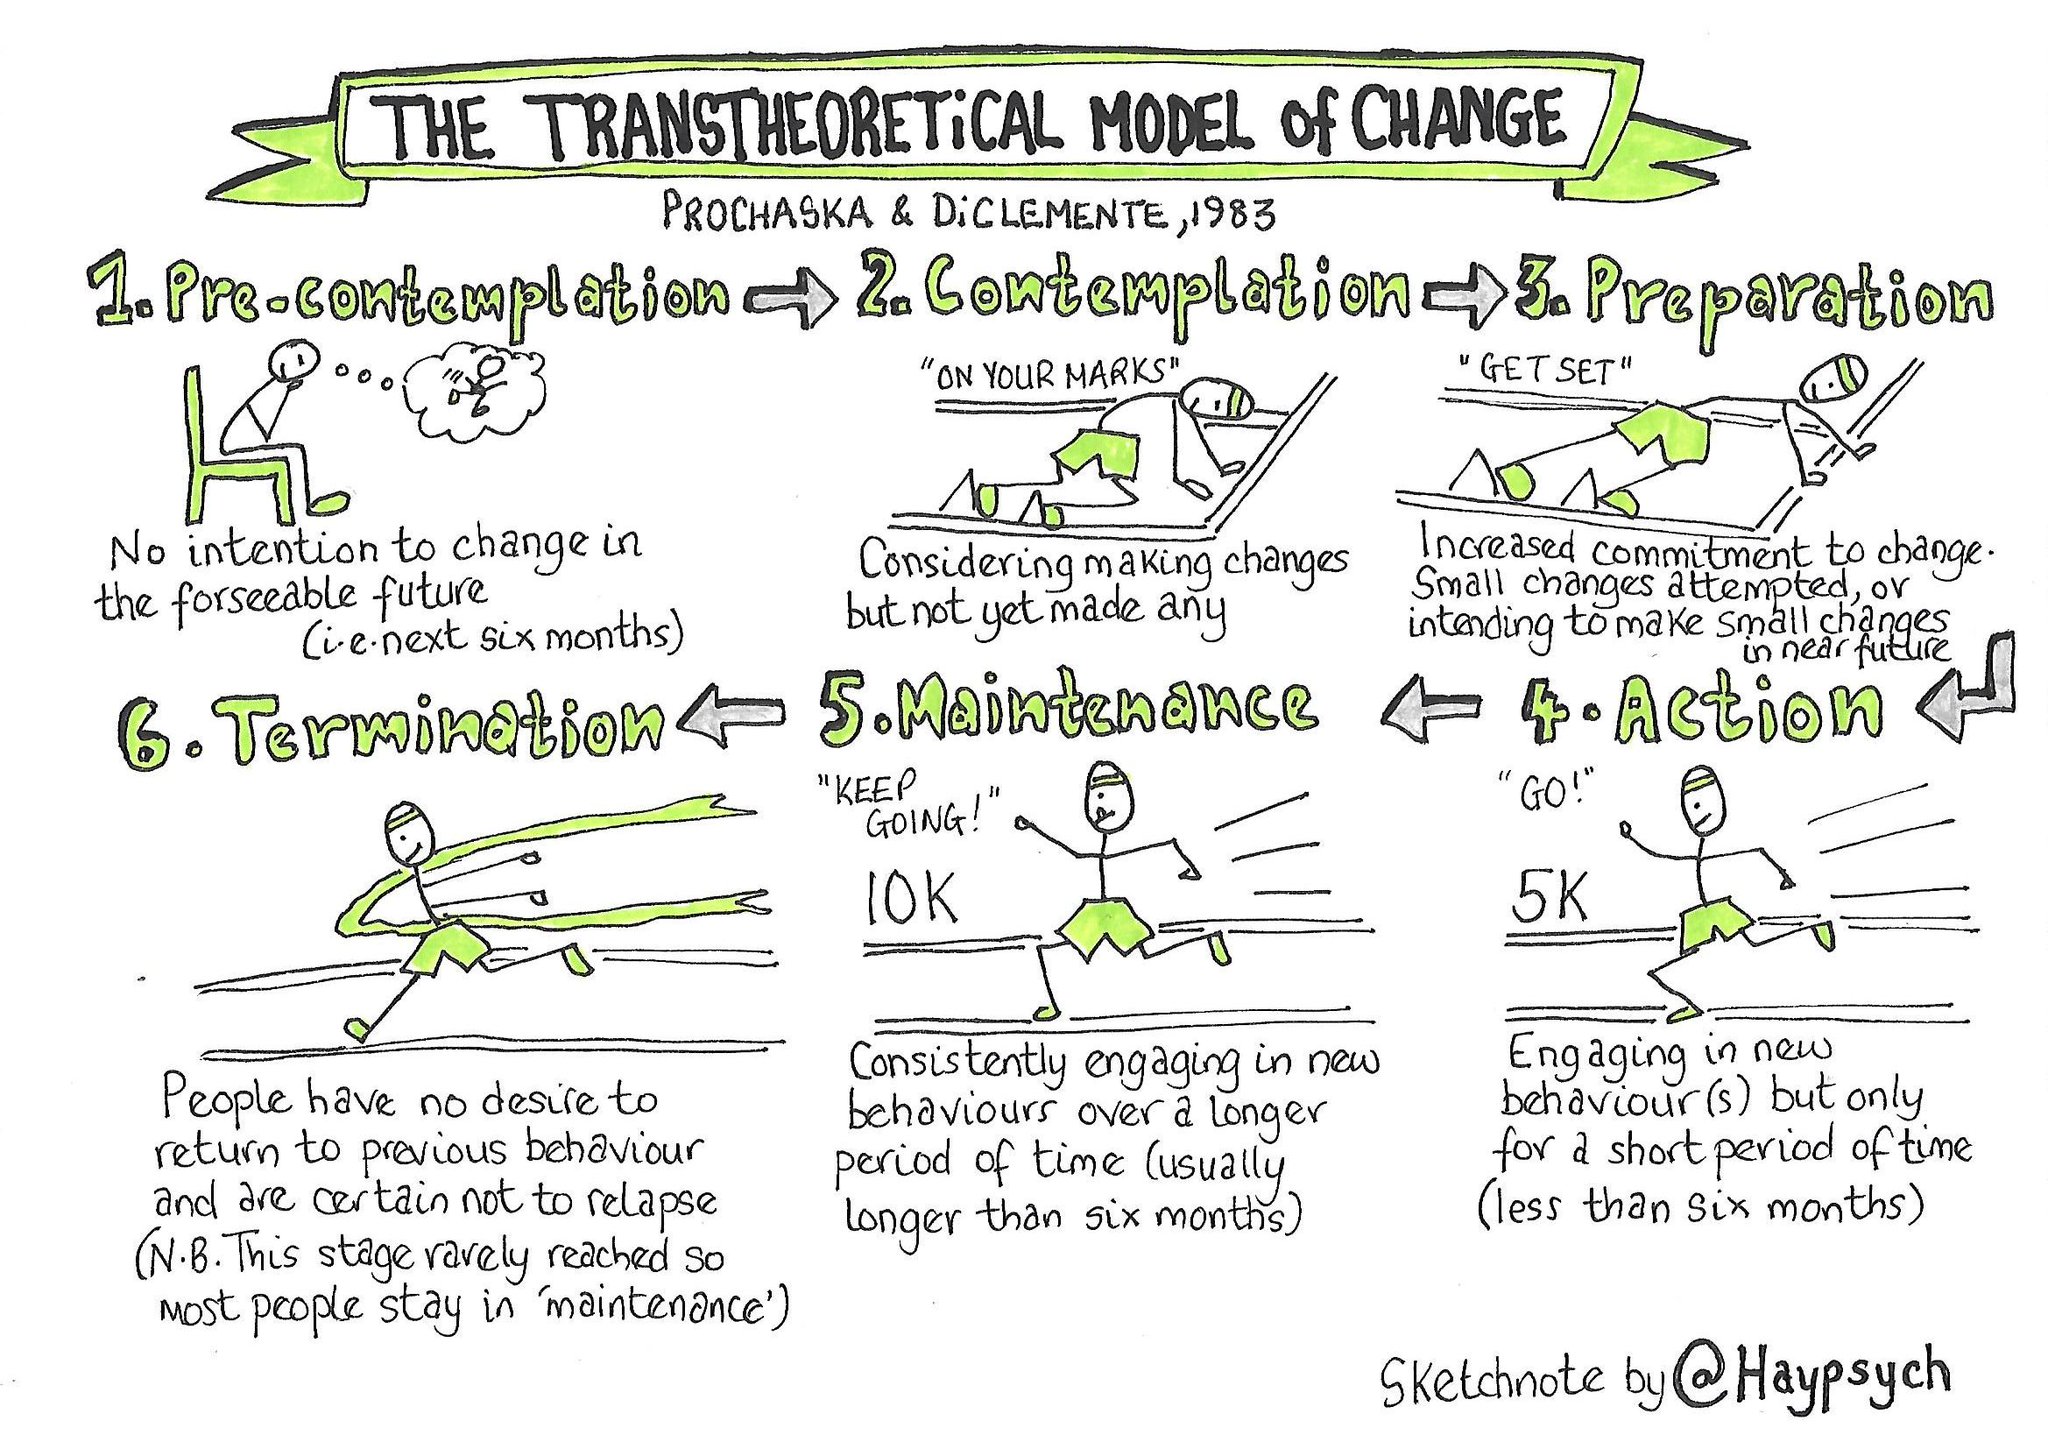 the cycle of change model by prochaska and diclemente